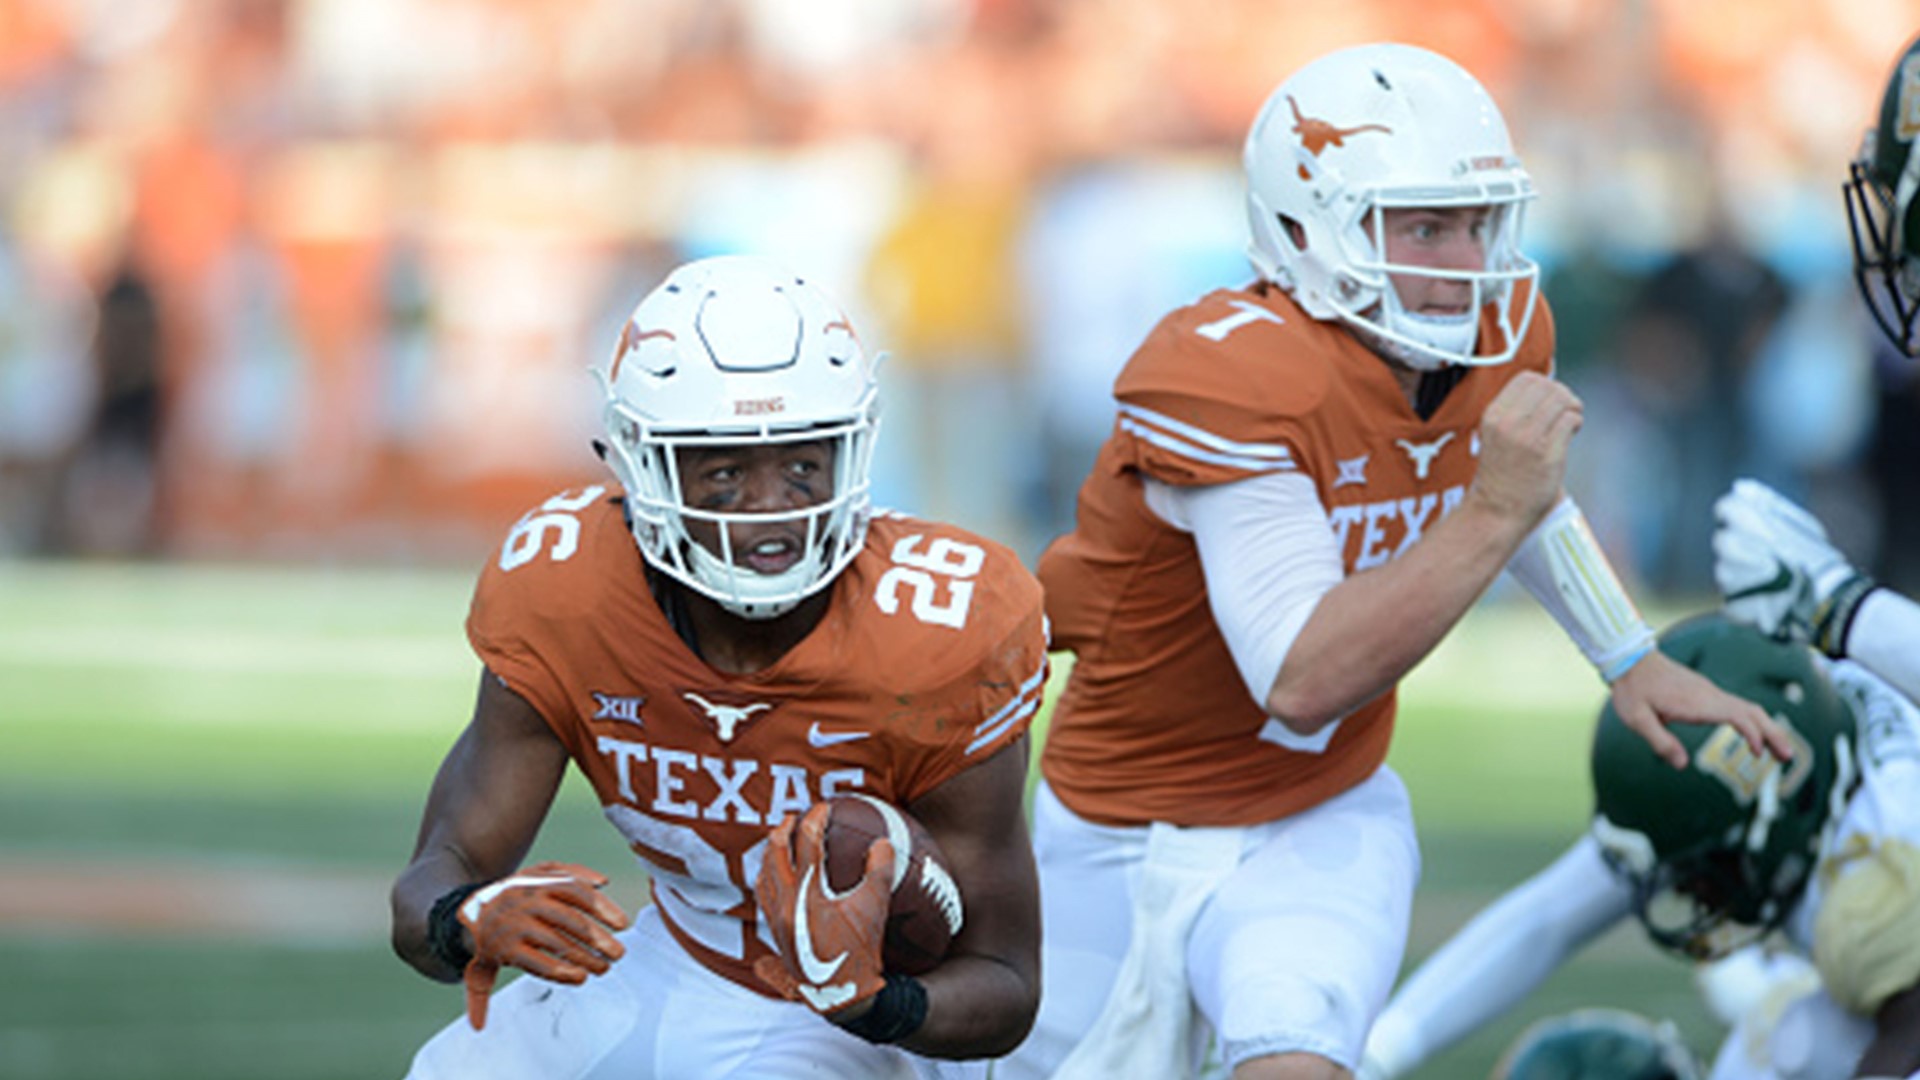 Keaontay Ingram had 708 rushing yards on 142 carries and three touchdowns for the Longhorns last season.